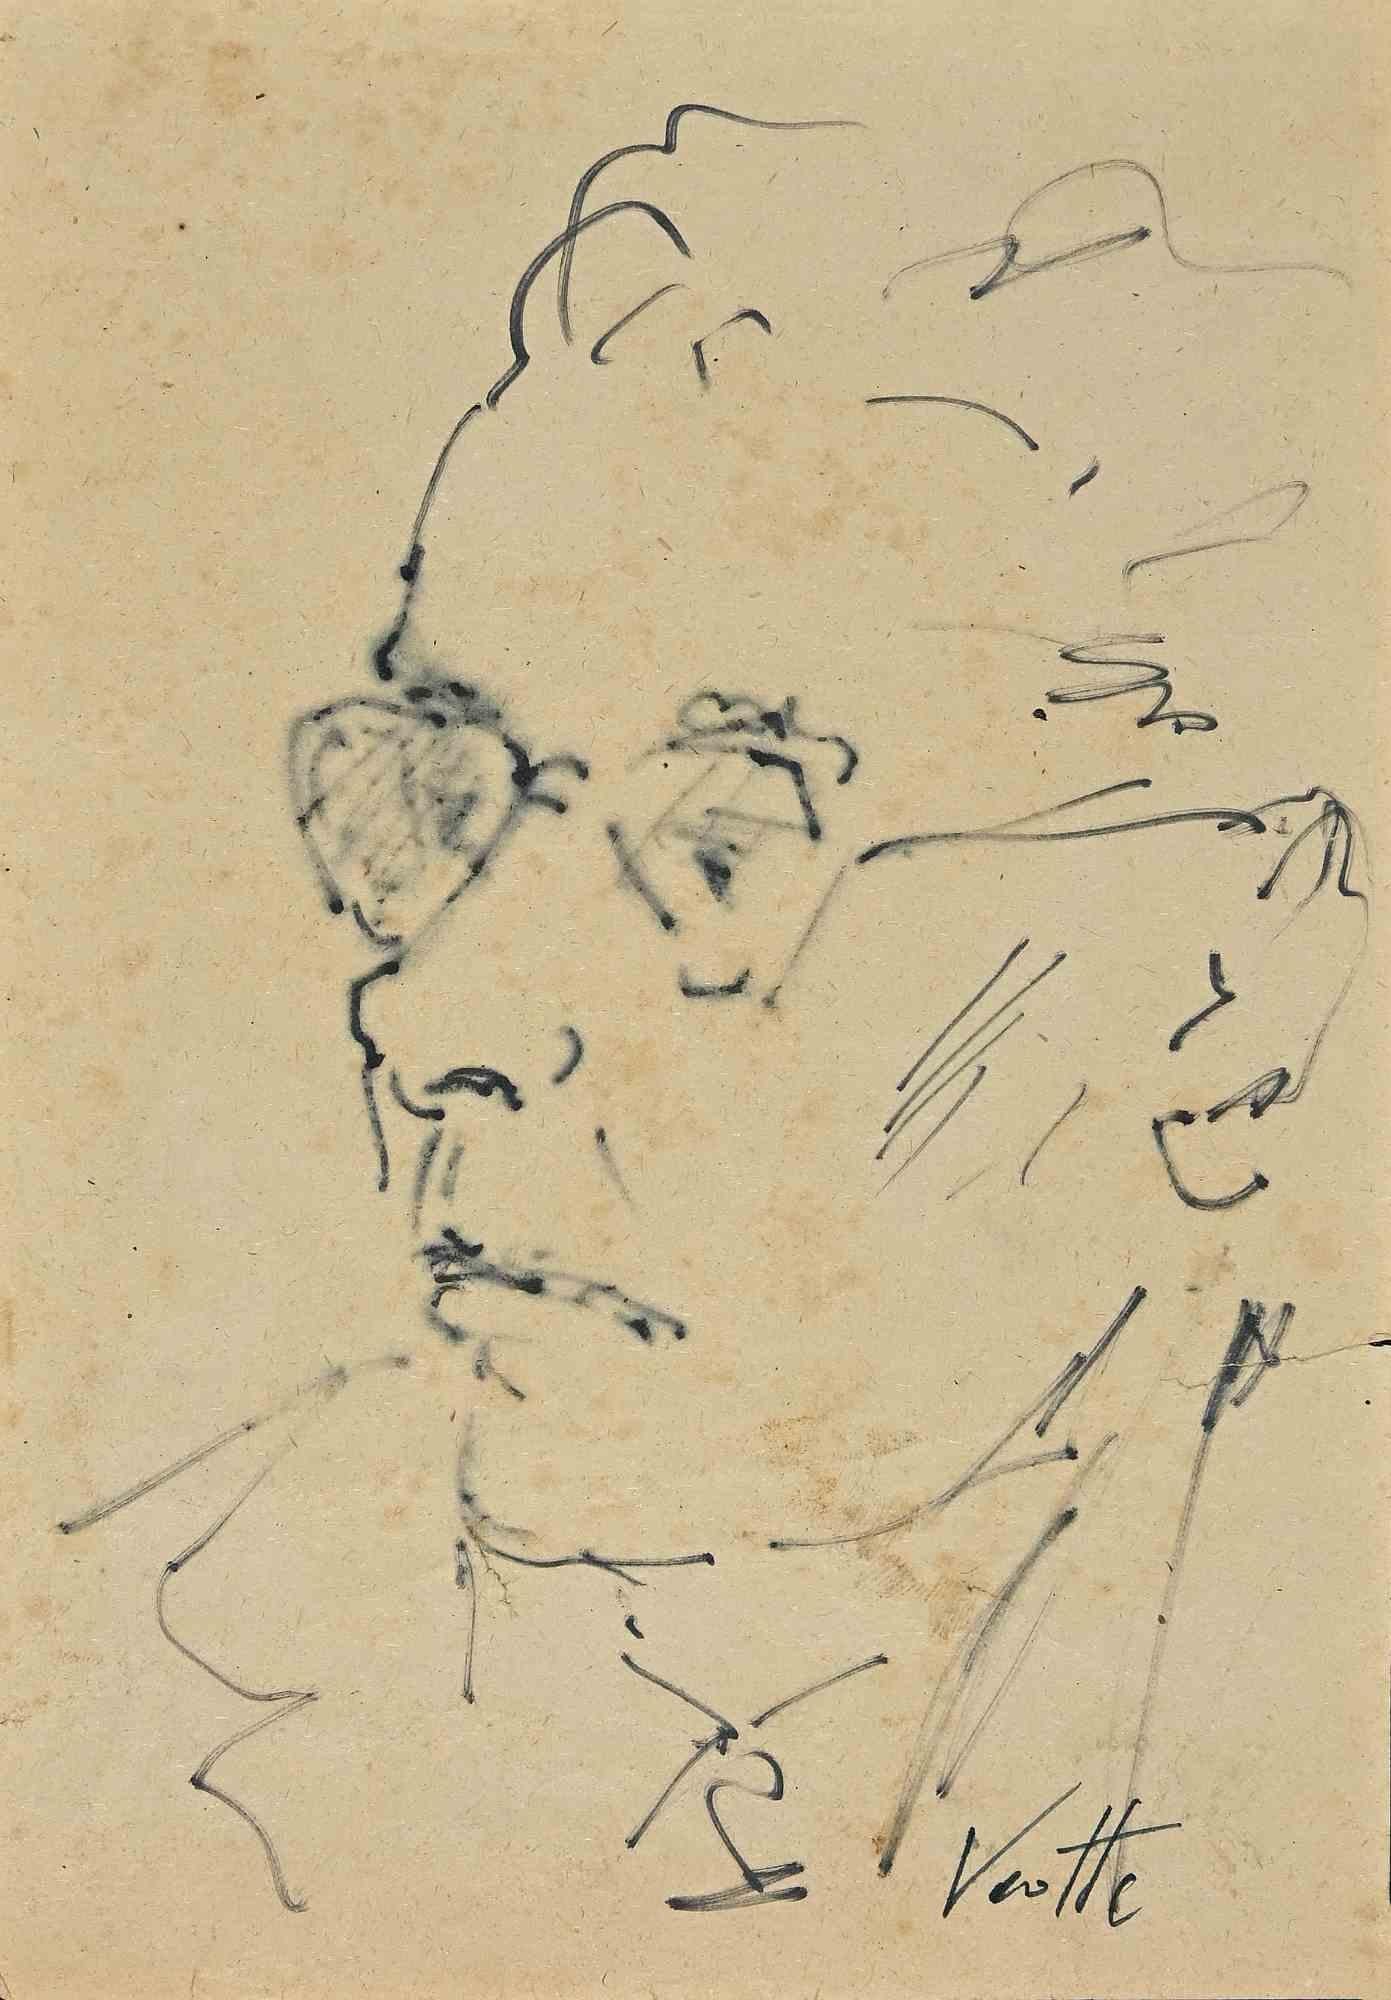 Portrait is an original pen drawing realized by Georges Vernotte.

Good condition on a yellowed paper.

Hand-signed by the artist on the lower right corner.